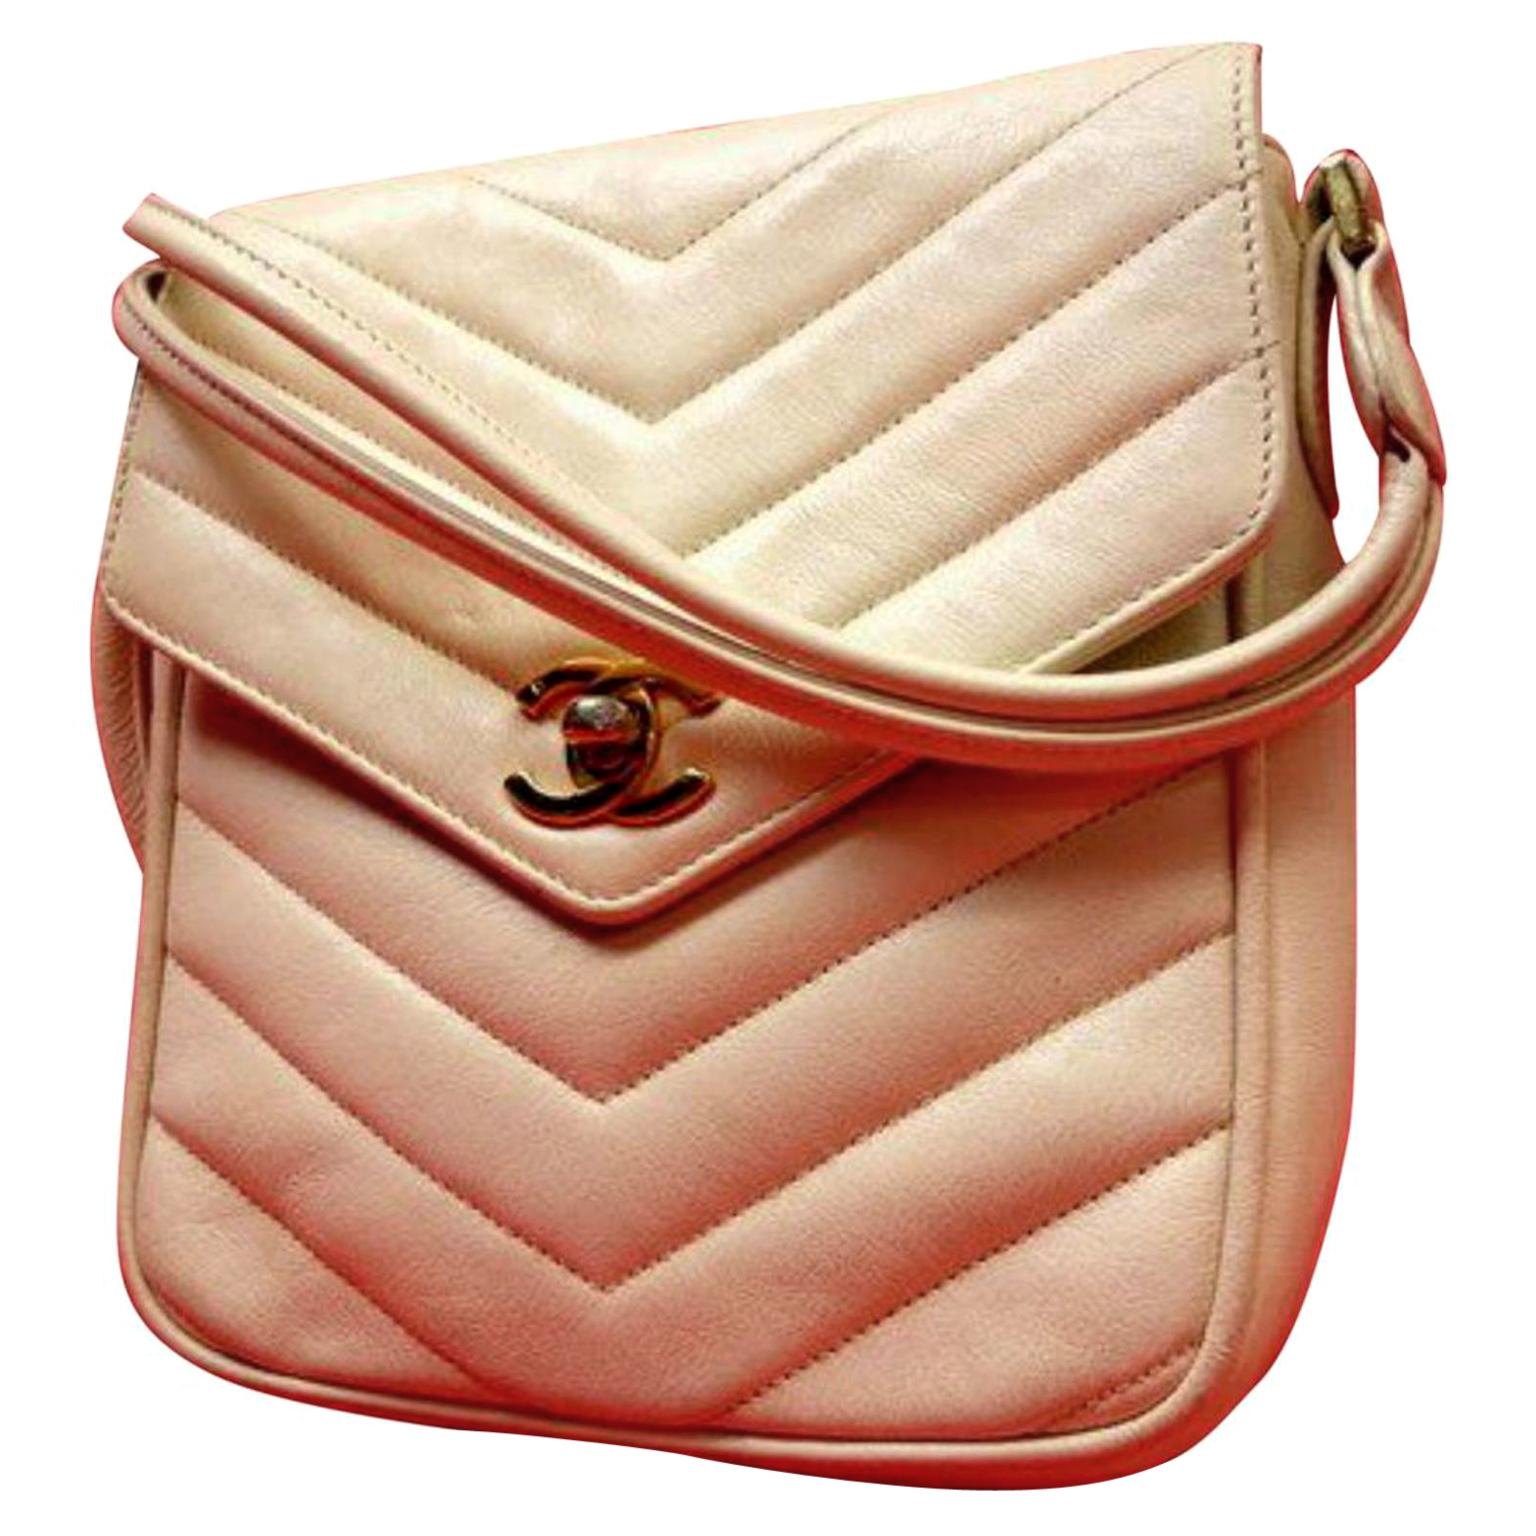 Chanel Chevron Quilted Lambskin Mini Flap 224211 Beige Leather Cross Body Bag For Sale